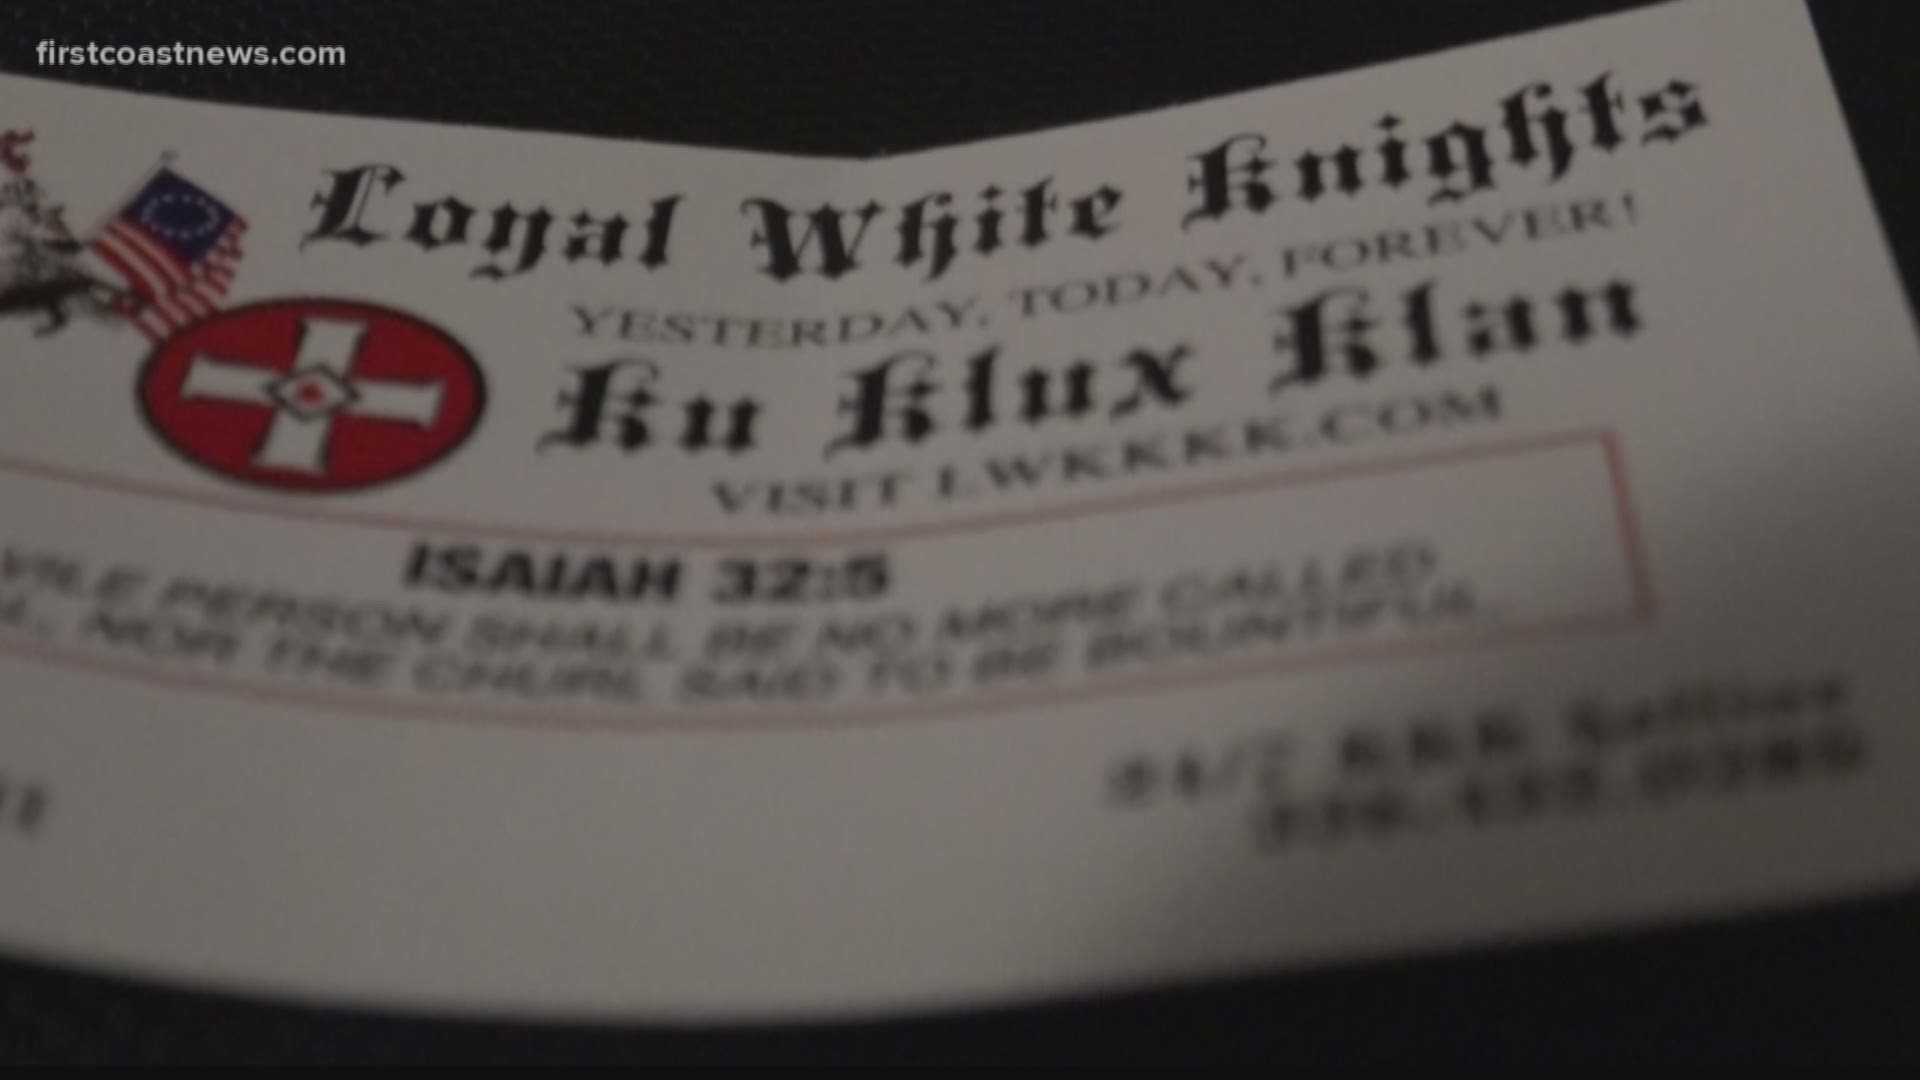 Many people living in Murray Hill woke up to Ku Klux Klan fliers in their driveways Monday morning.